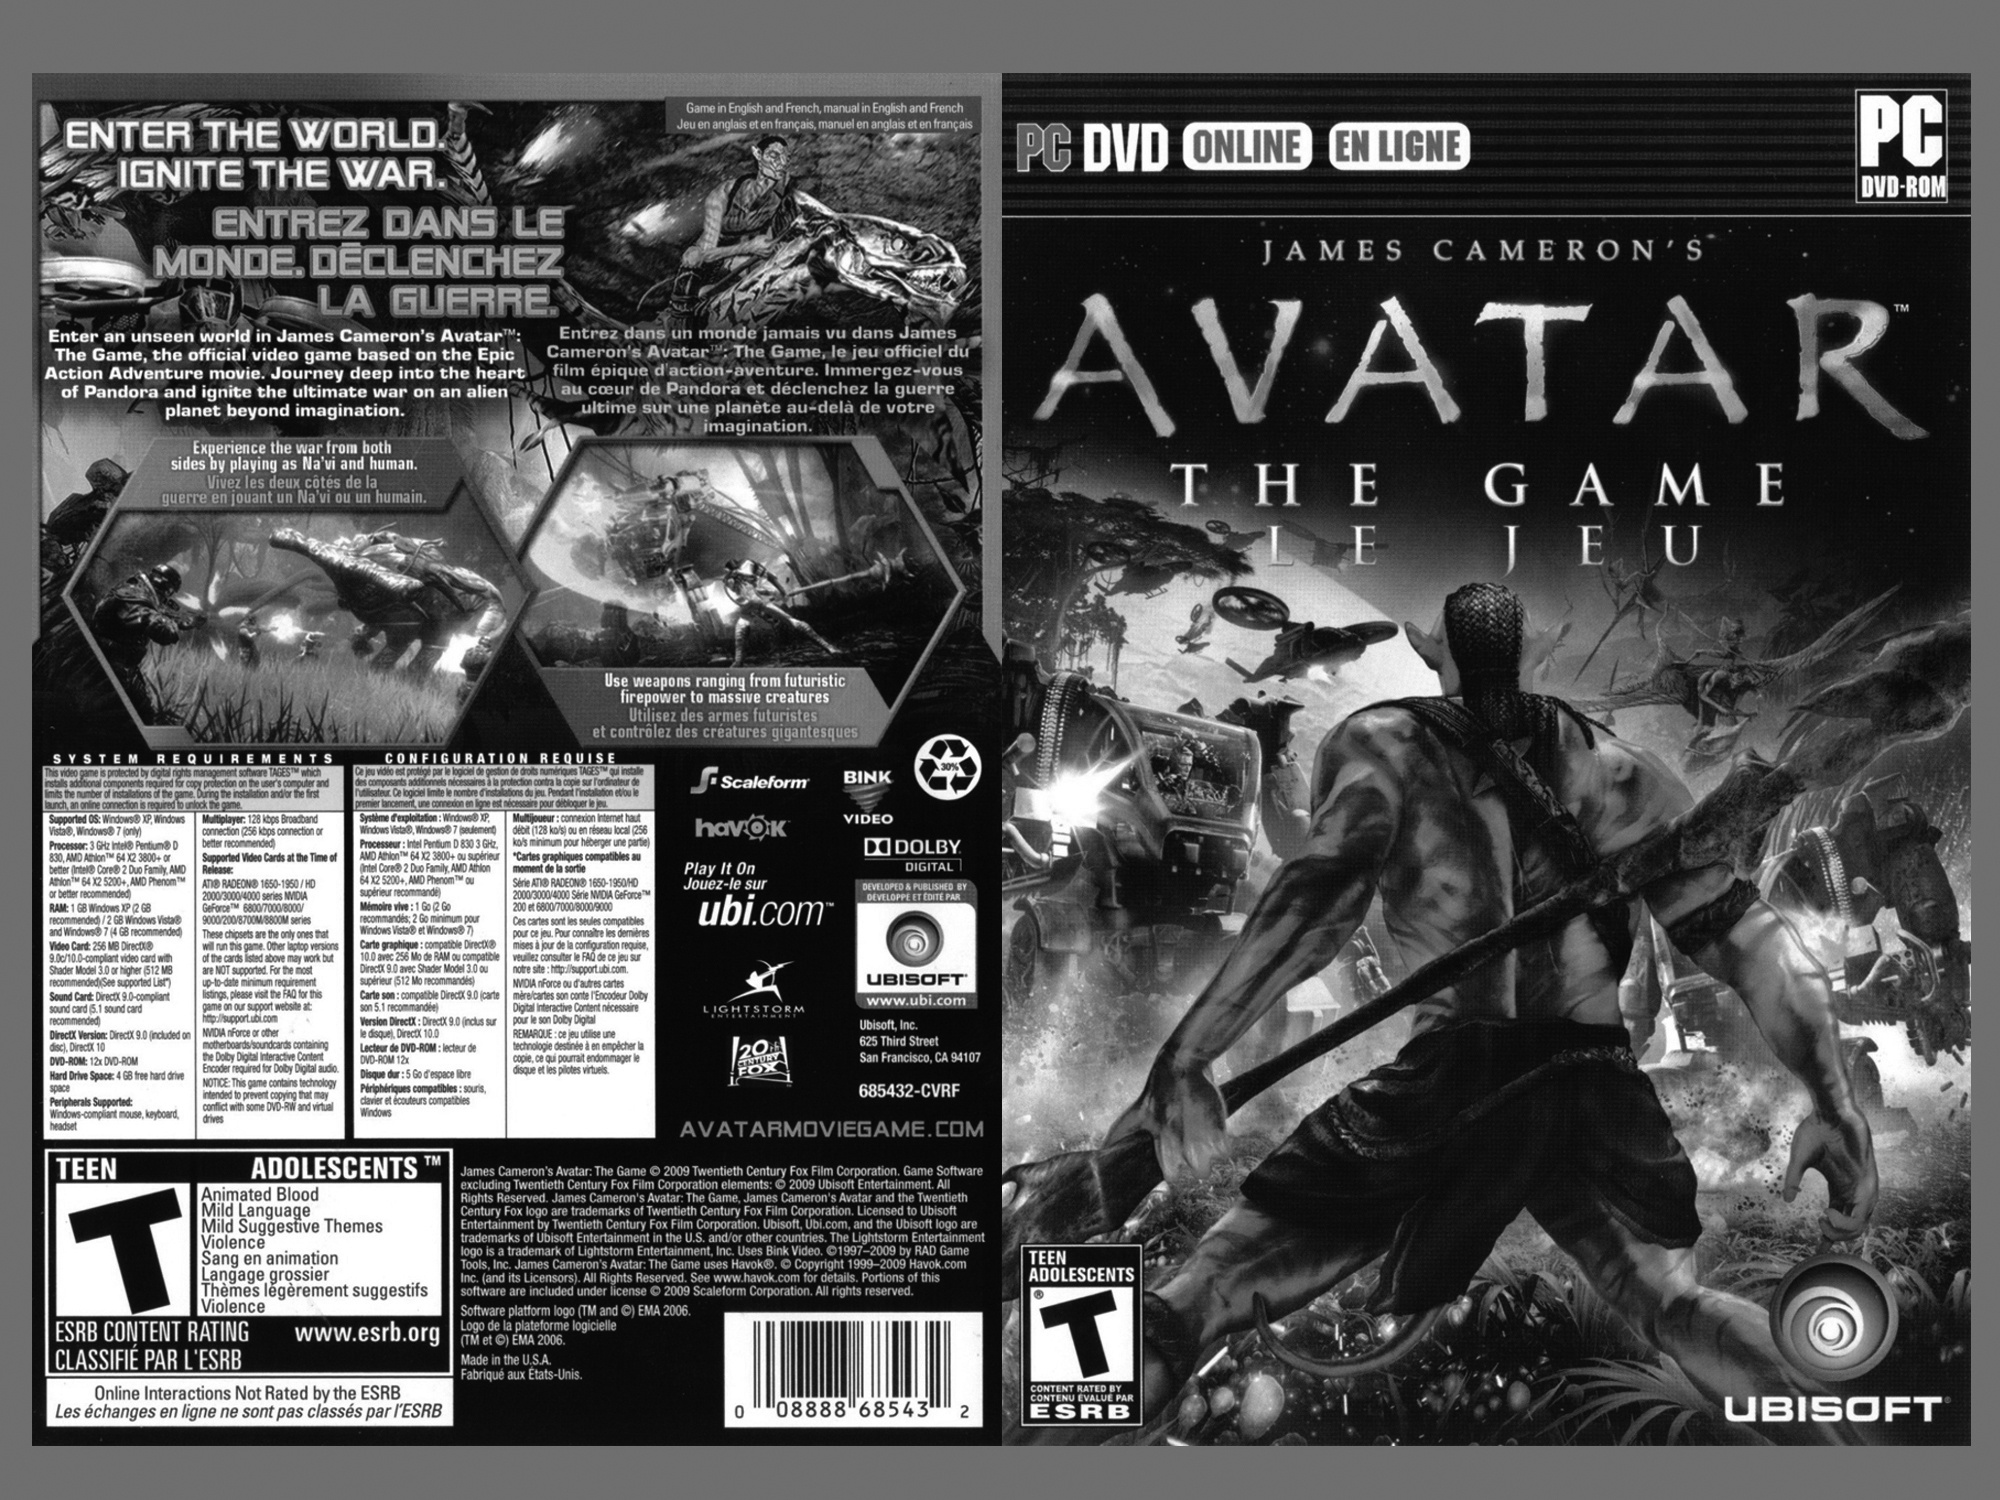 James Cameron's Avatar The Game box cover